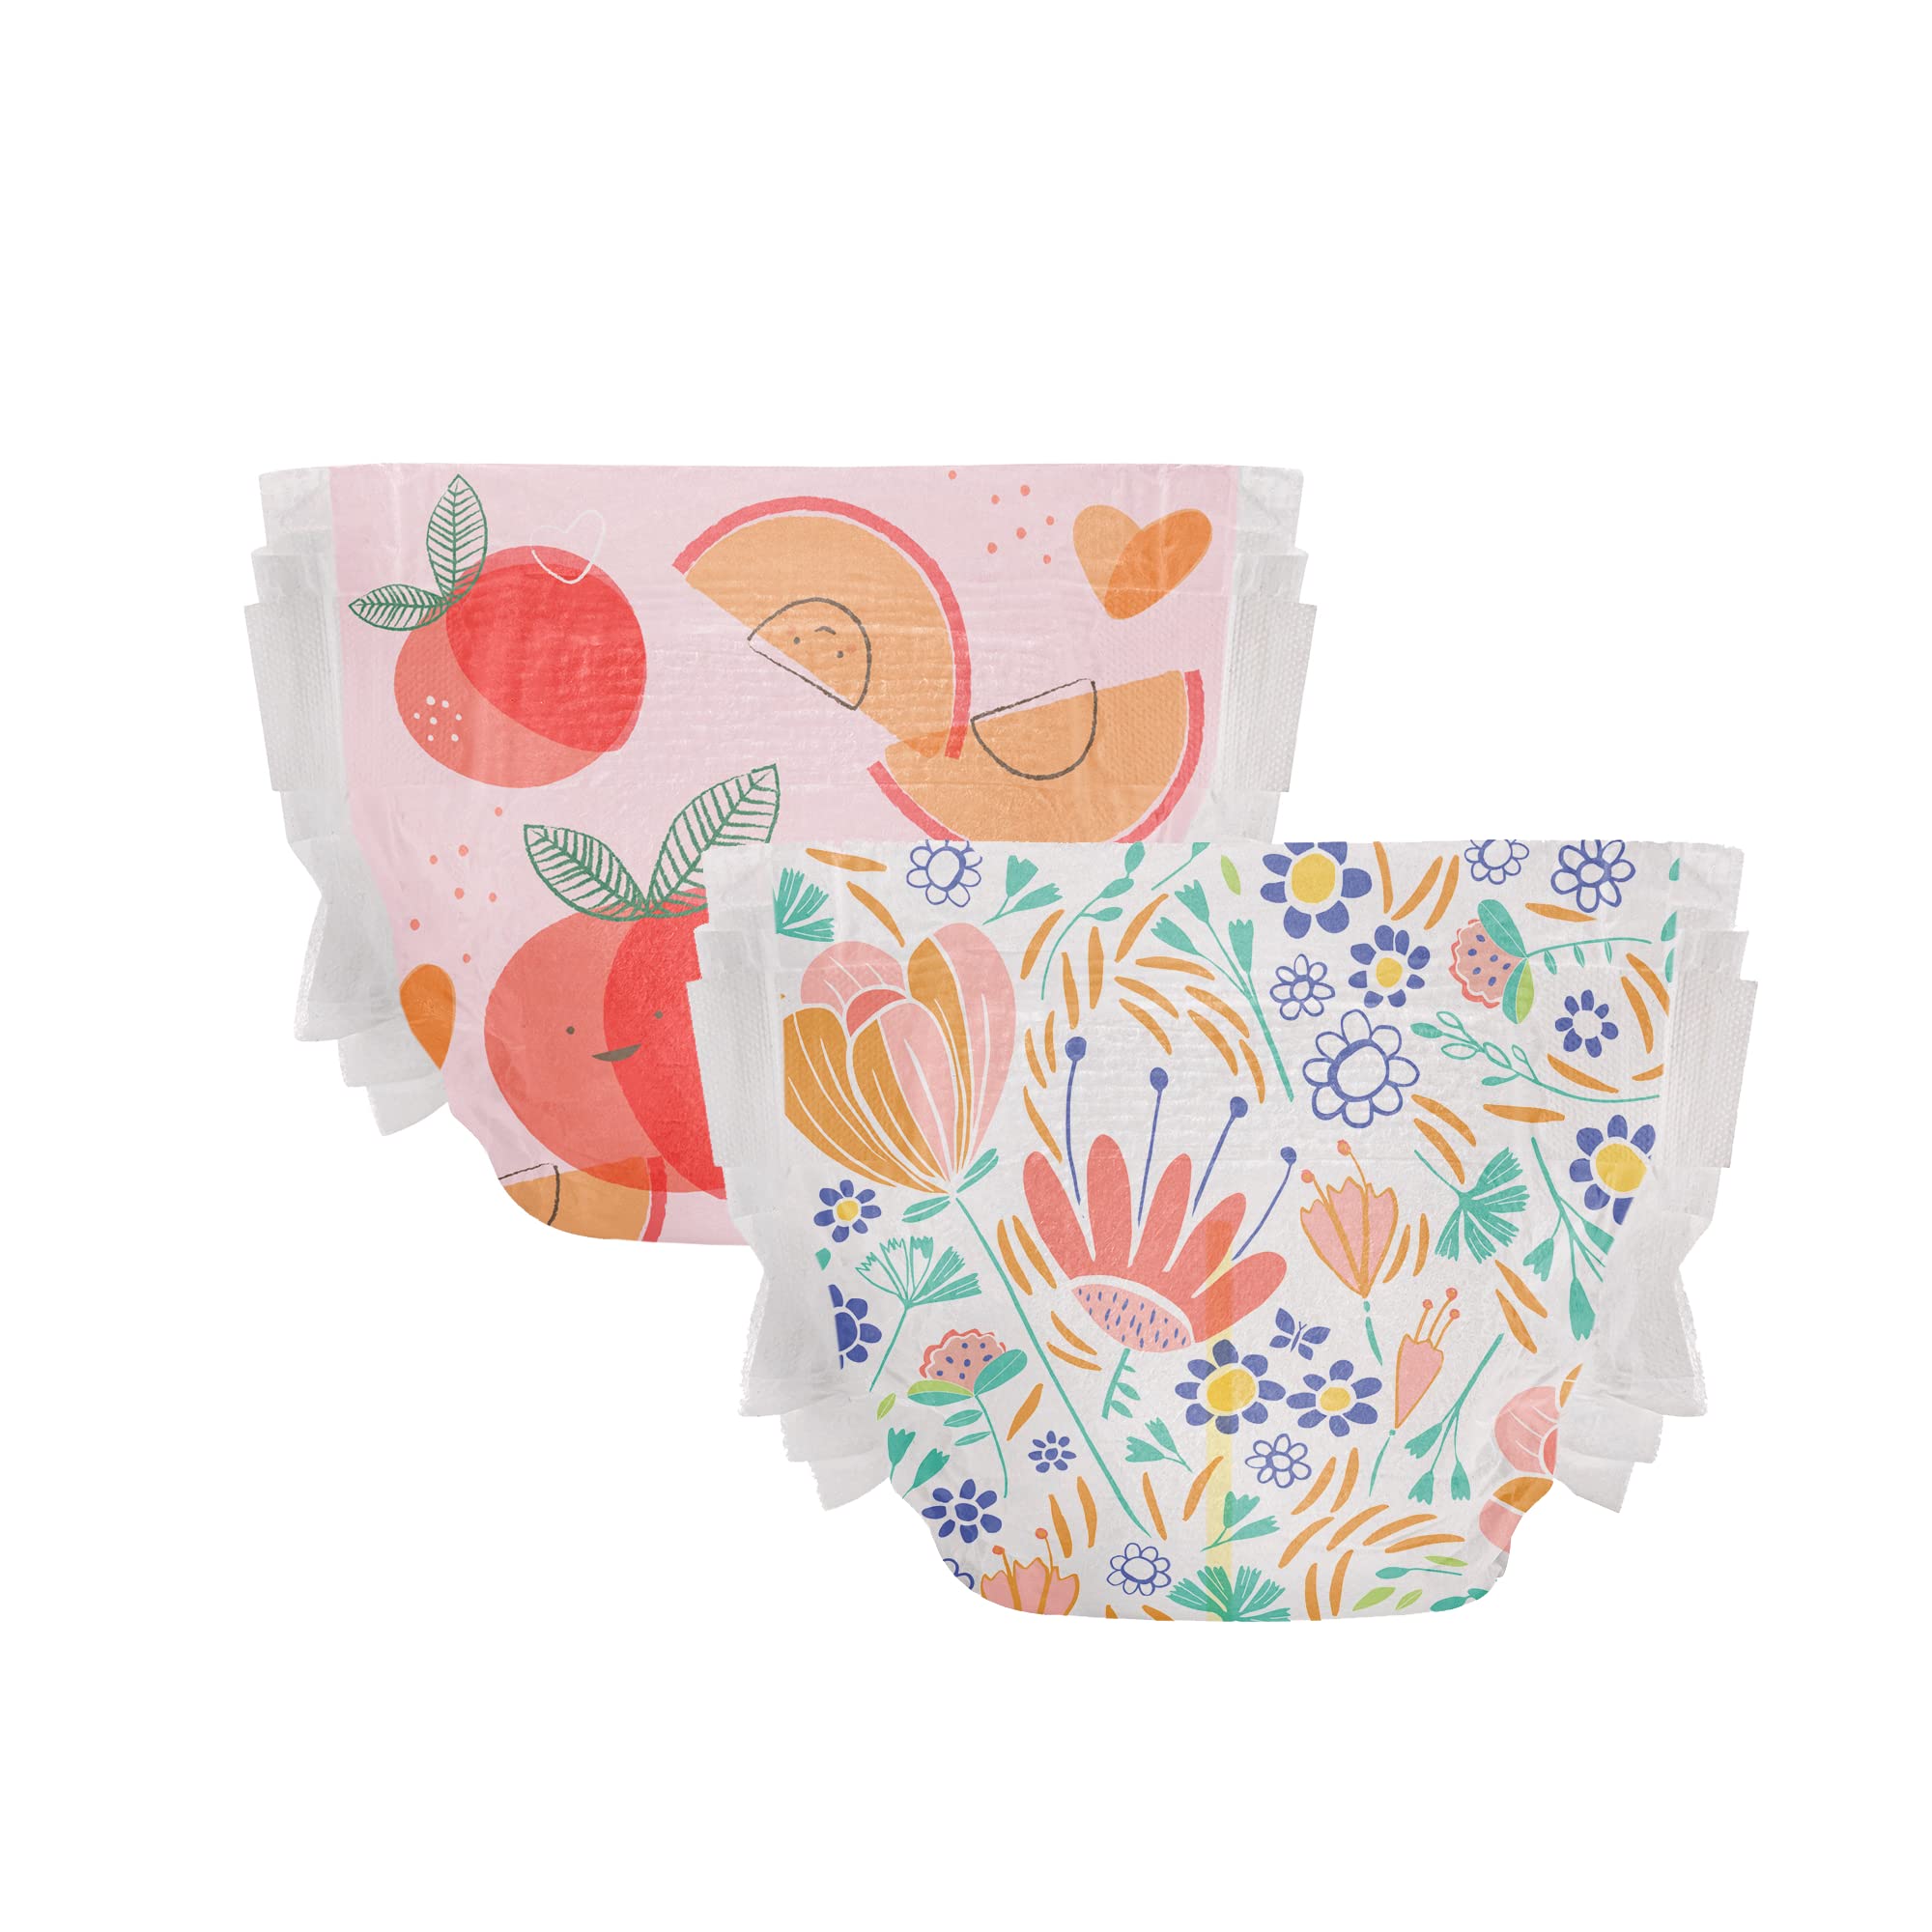 The Honest Company Clean Conscious Diapers | Plant-Based, Sustainable | Just Peachy + Flower Power | Super Club Box, Size 4 (22-37 lbs), 104 Count